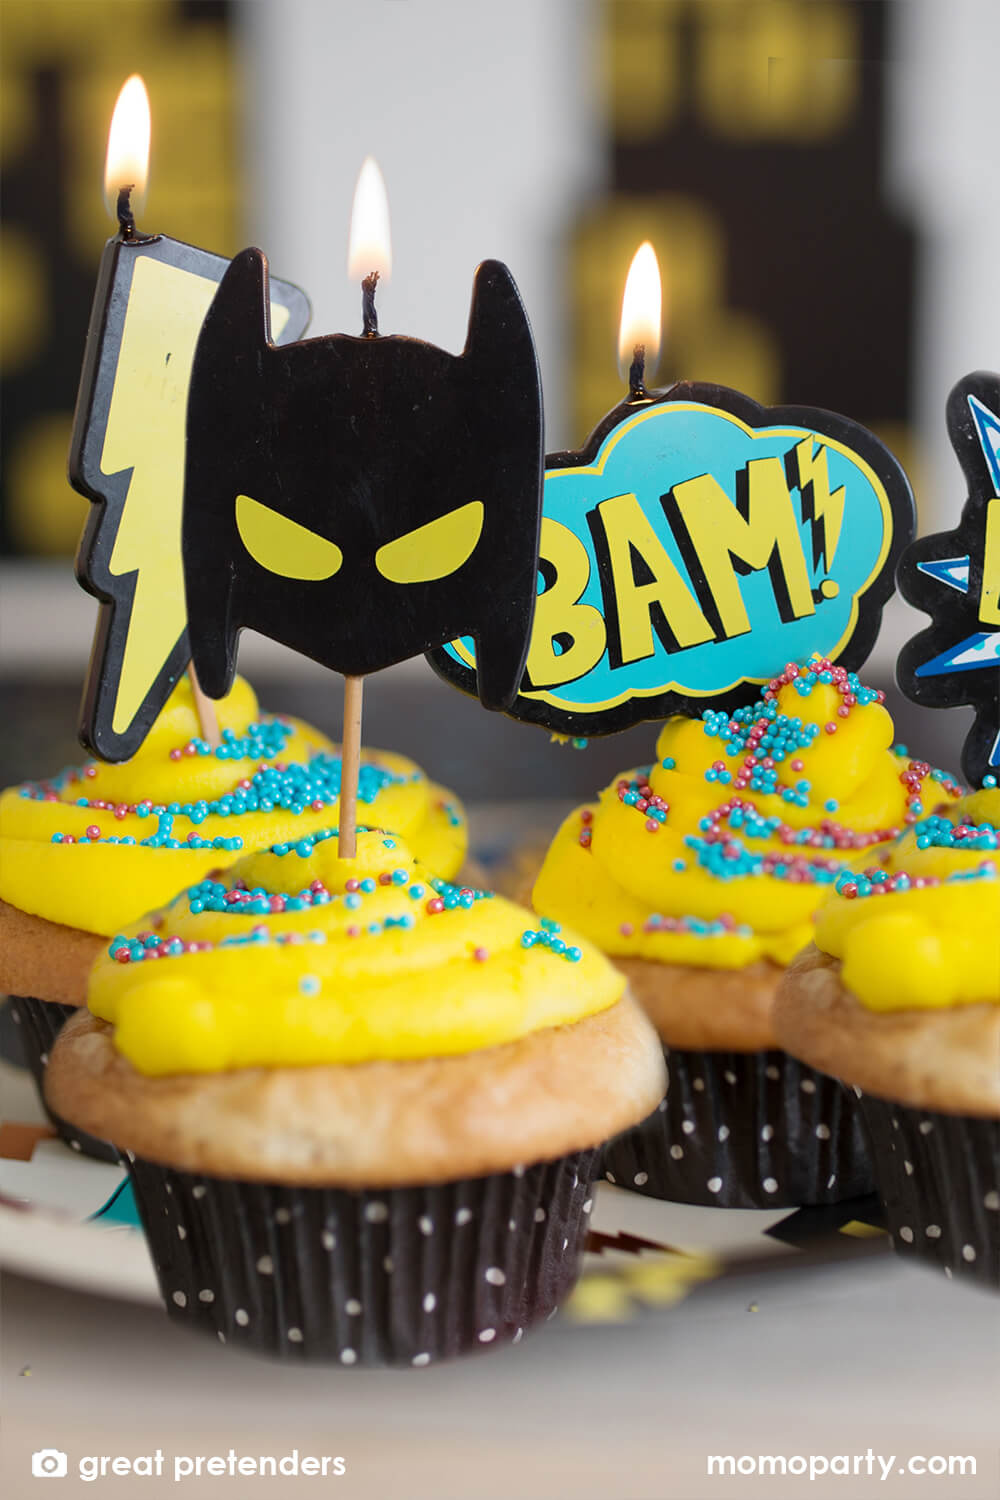 Superhero Candles set by Great Pretenders. Featuring a heroic mask, two comic action bubbles, and a lightning bolt shaped candle on cupcakes with yellow butter and sprinkle decorations. These candles are a simple way to bring a cool factor to your cake. 